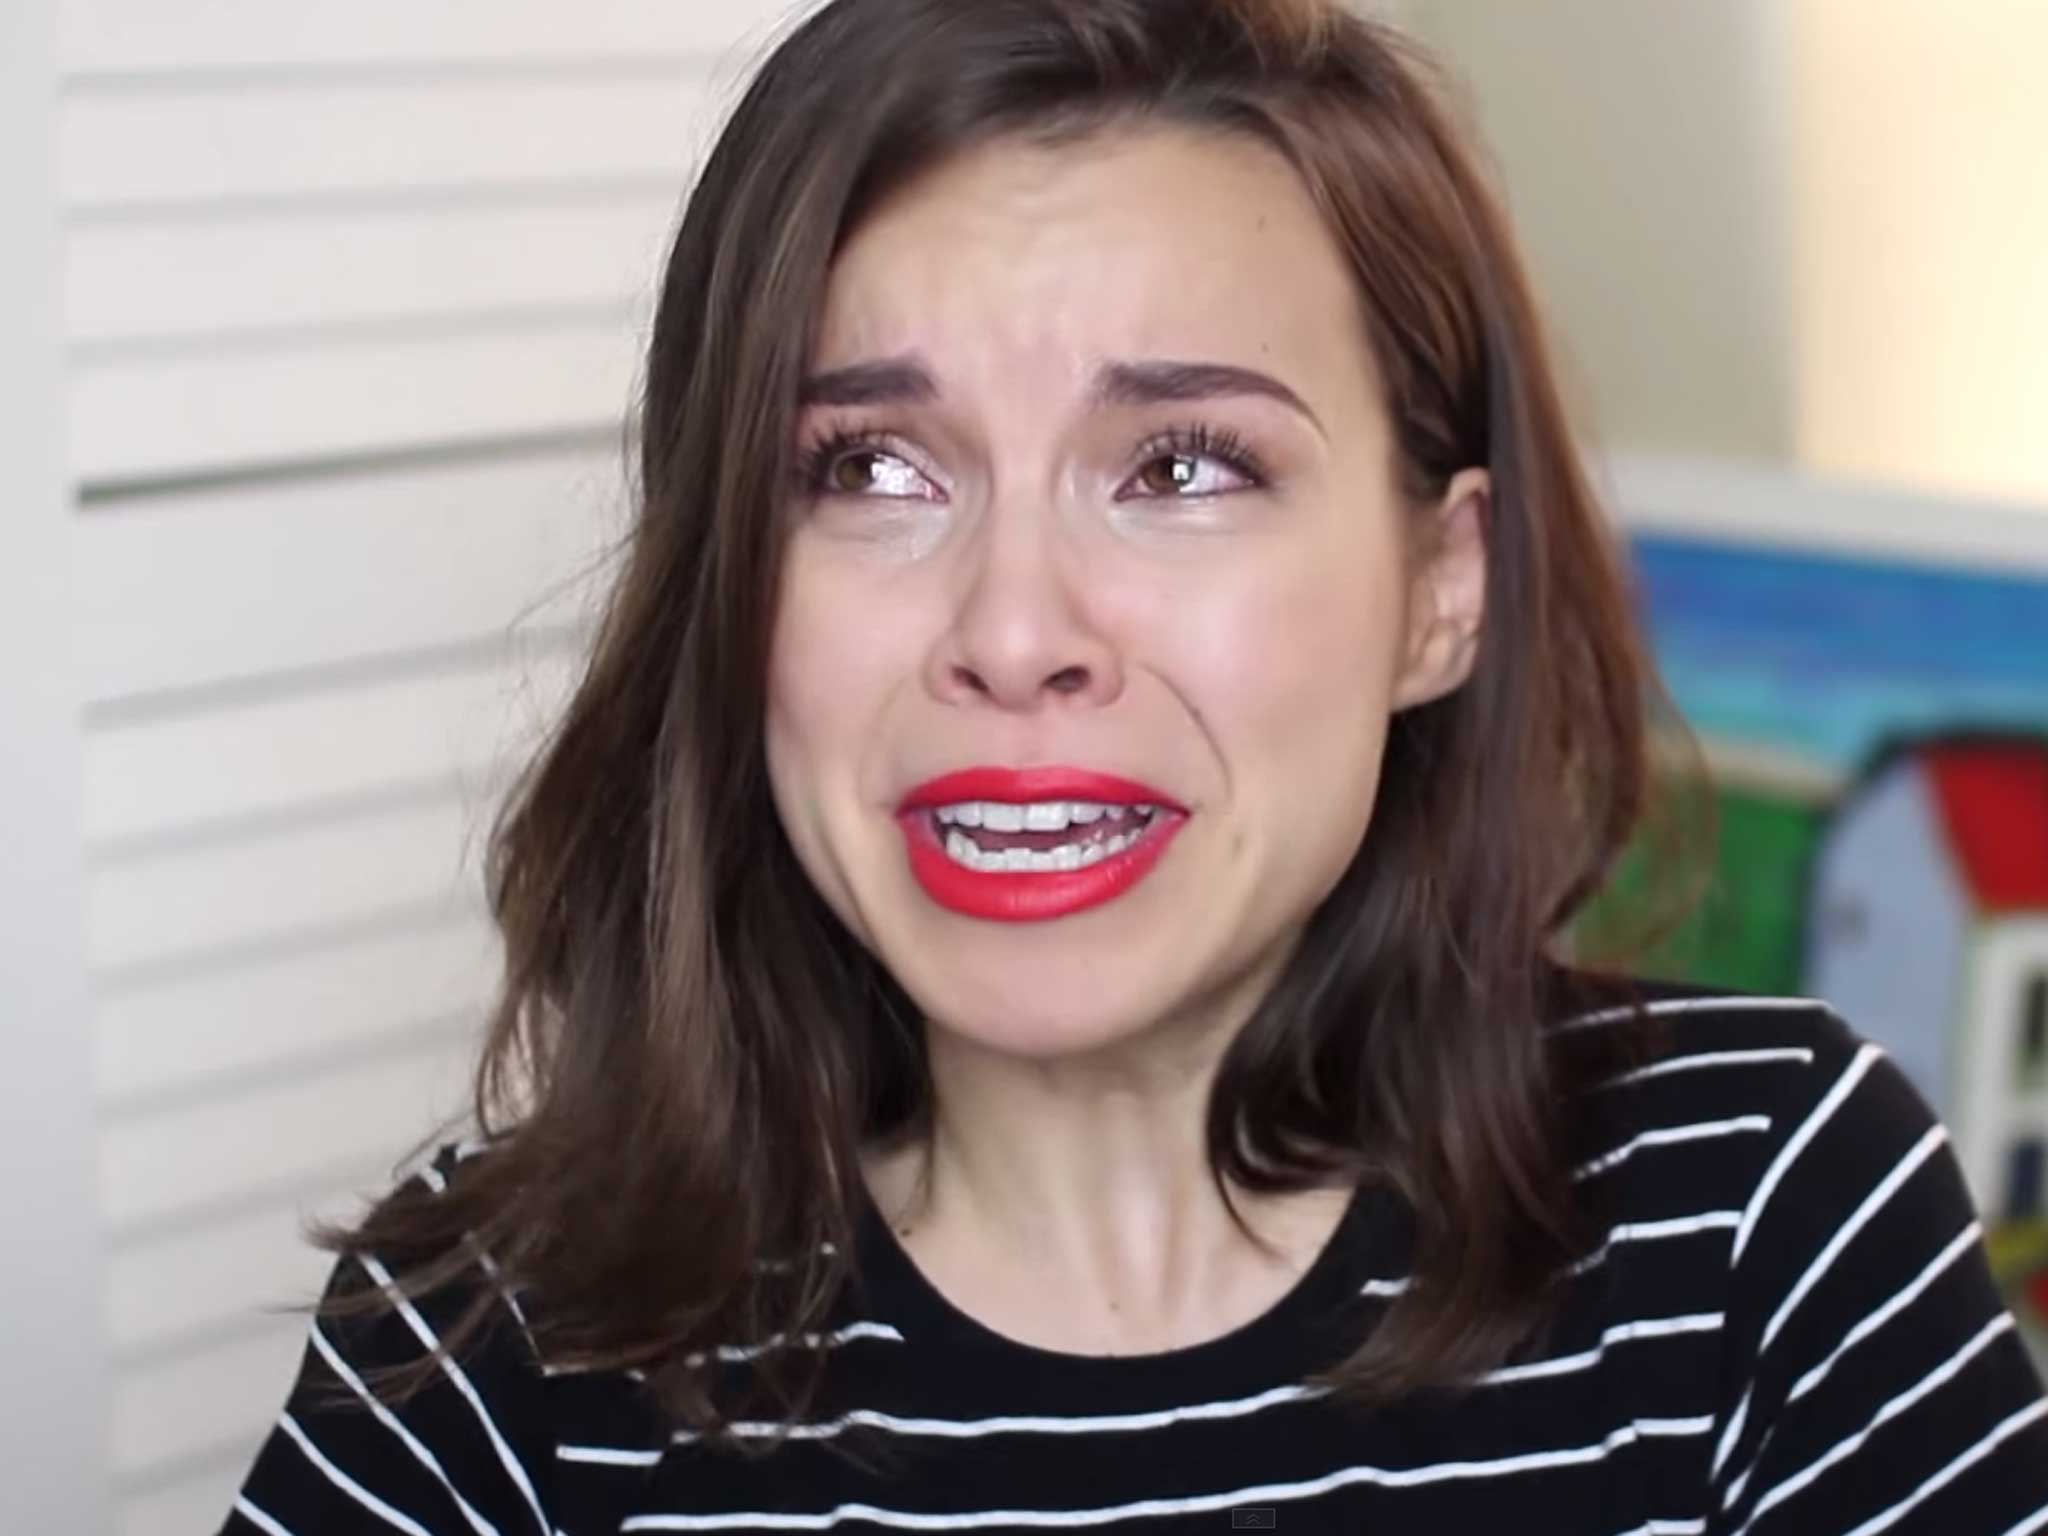 Ingrid Nilsen has come out to millions of subscribers and followers